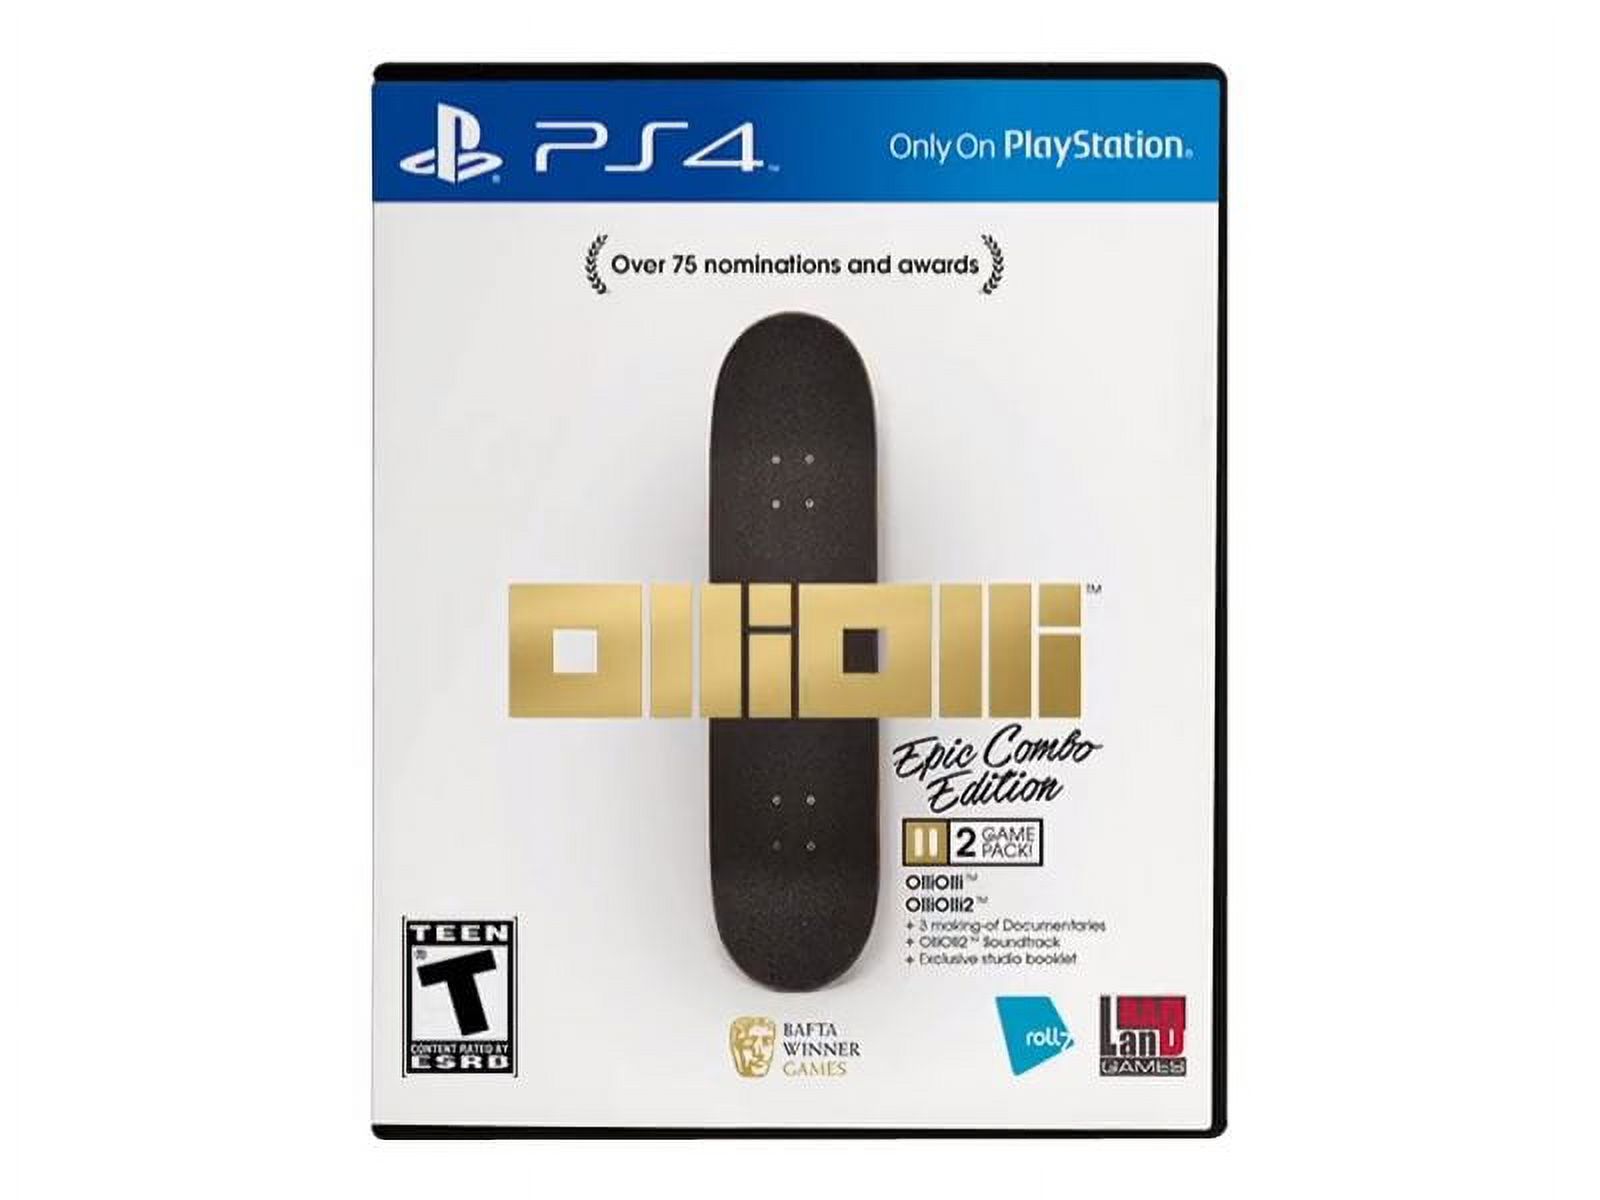 OlliOlli Epic Combo Edition - PlayStation 4 - image 1 of 5